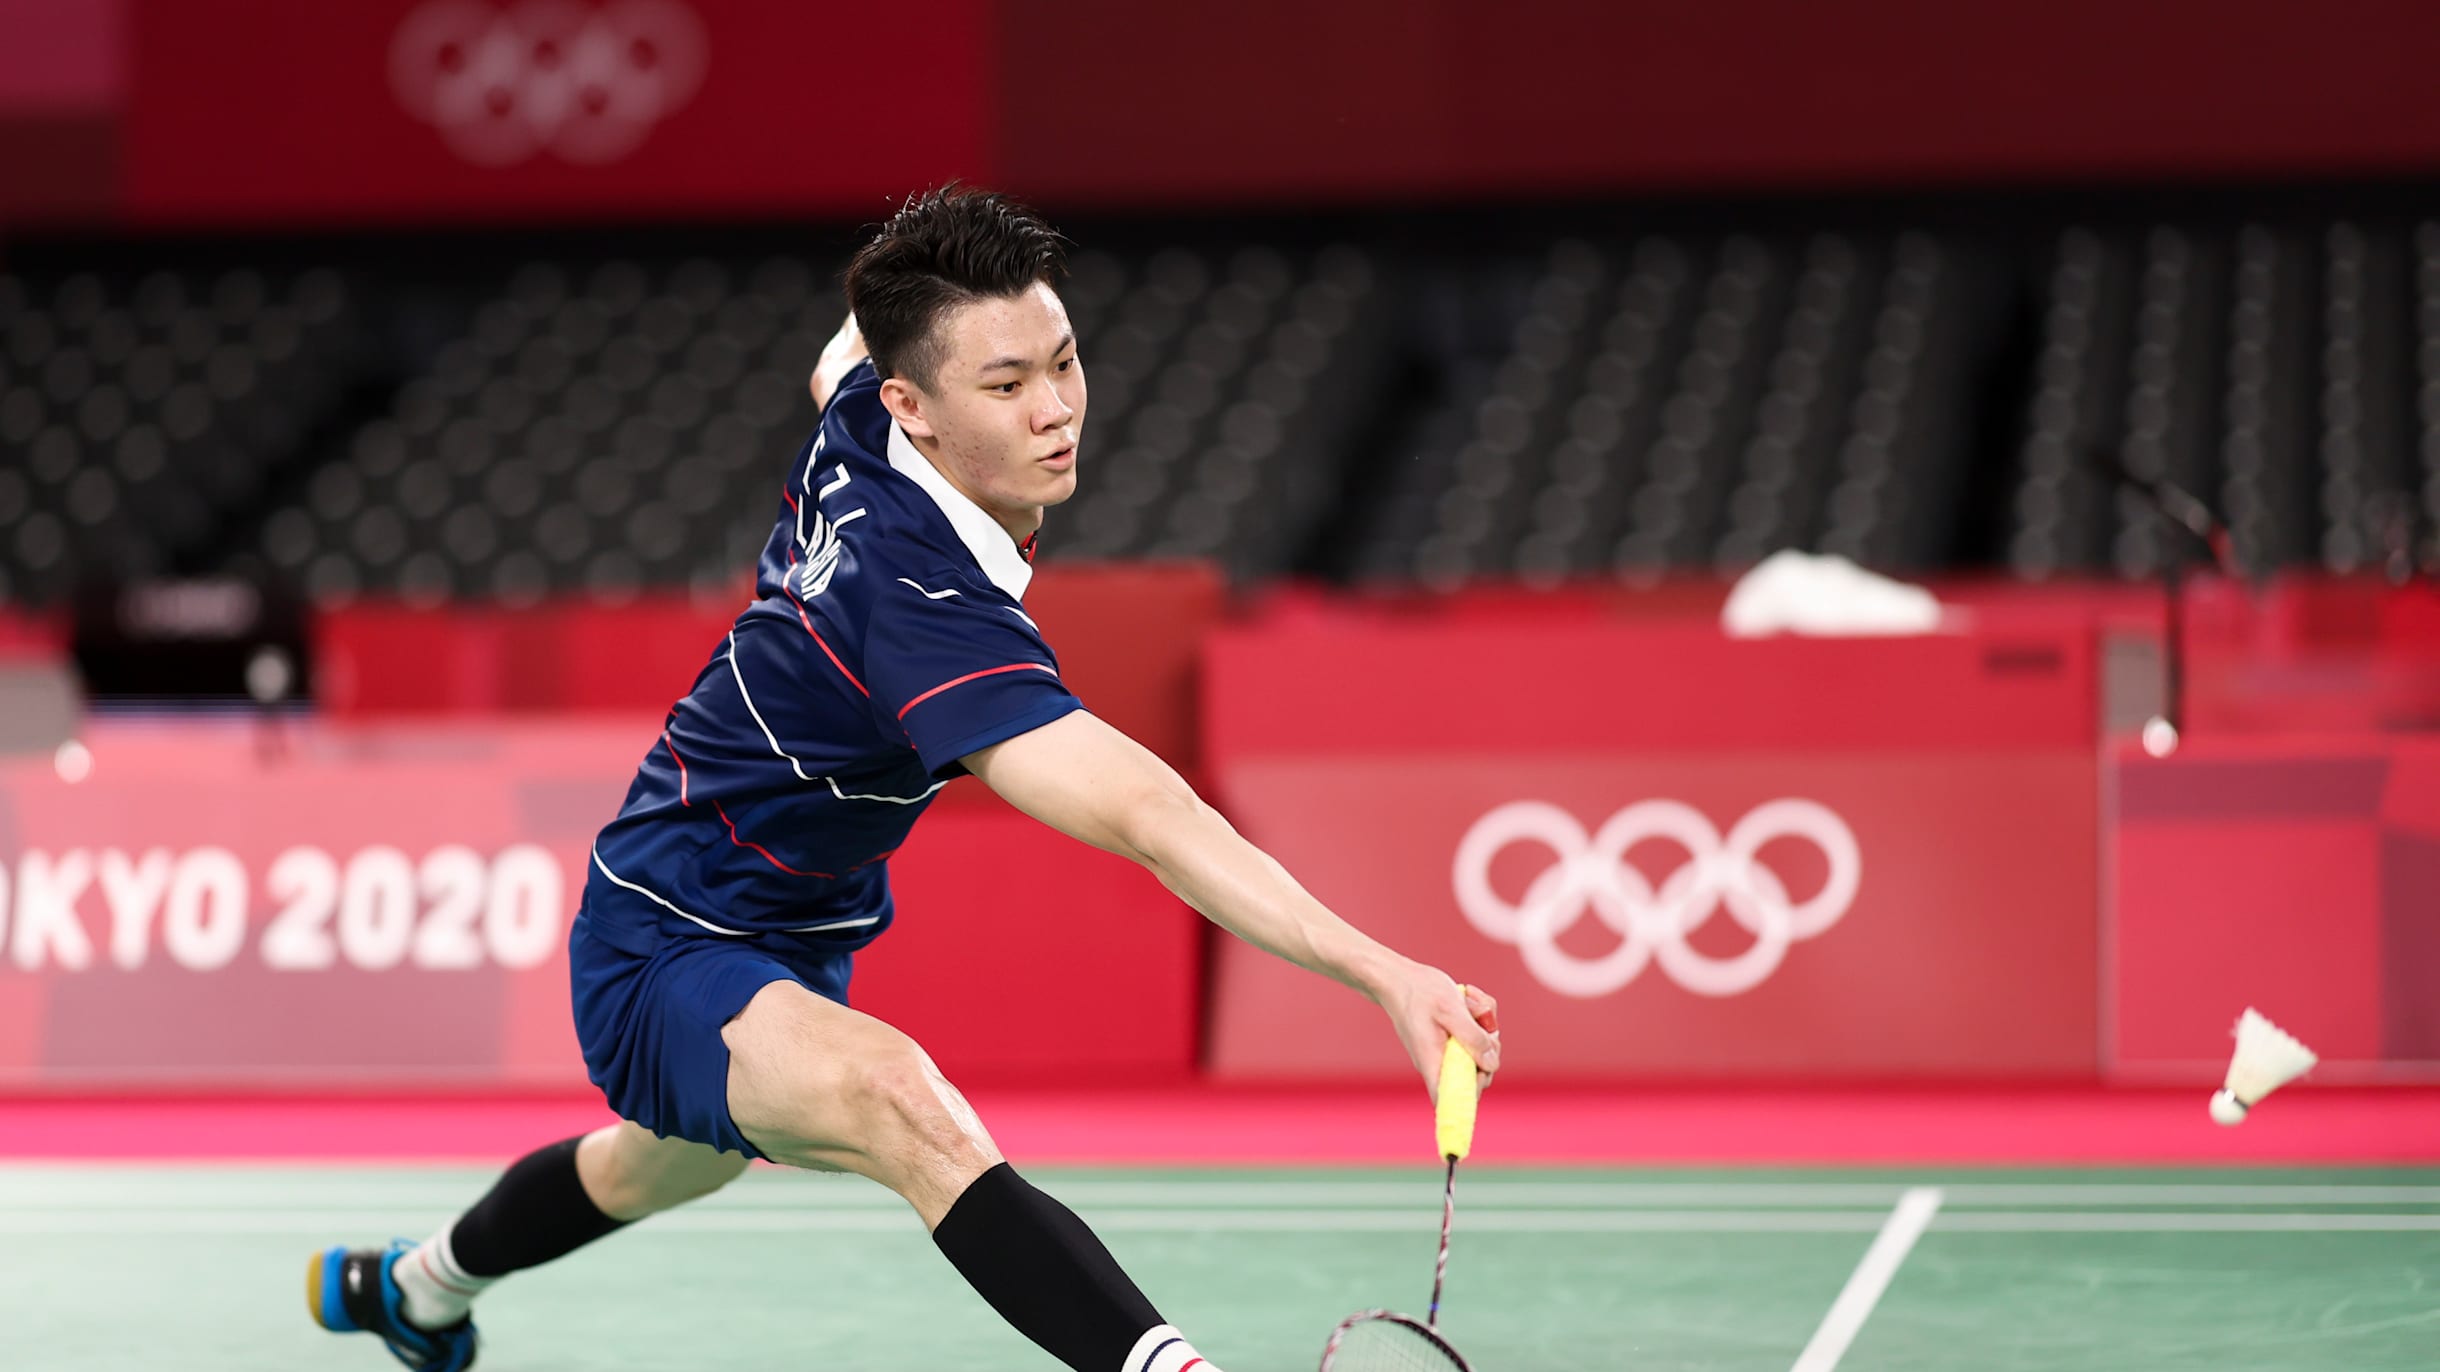 Badminton Indonesia Masters 2021 Preview, schedule, and watch live streaming and telecast in Malaysia